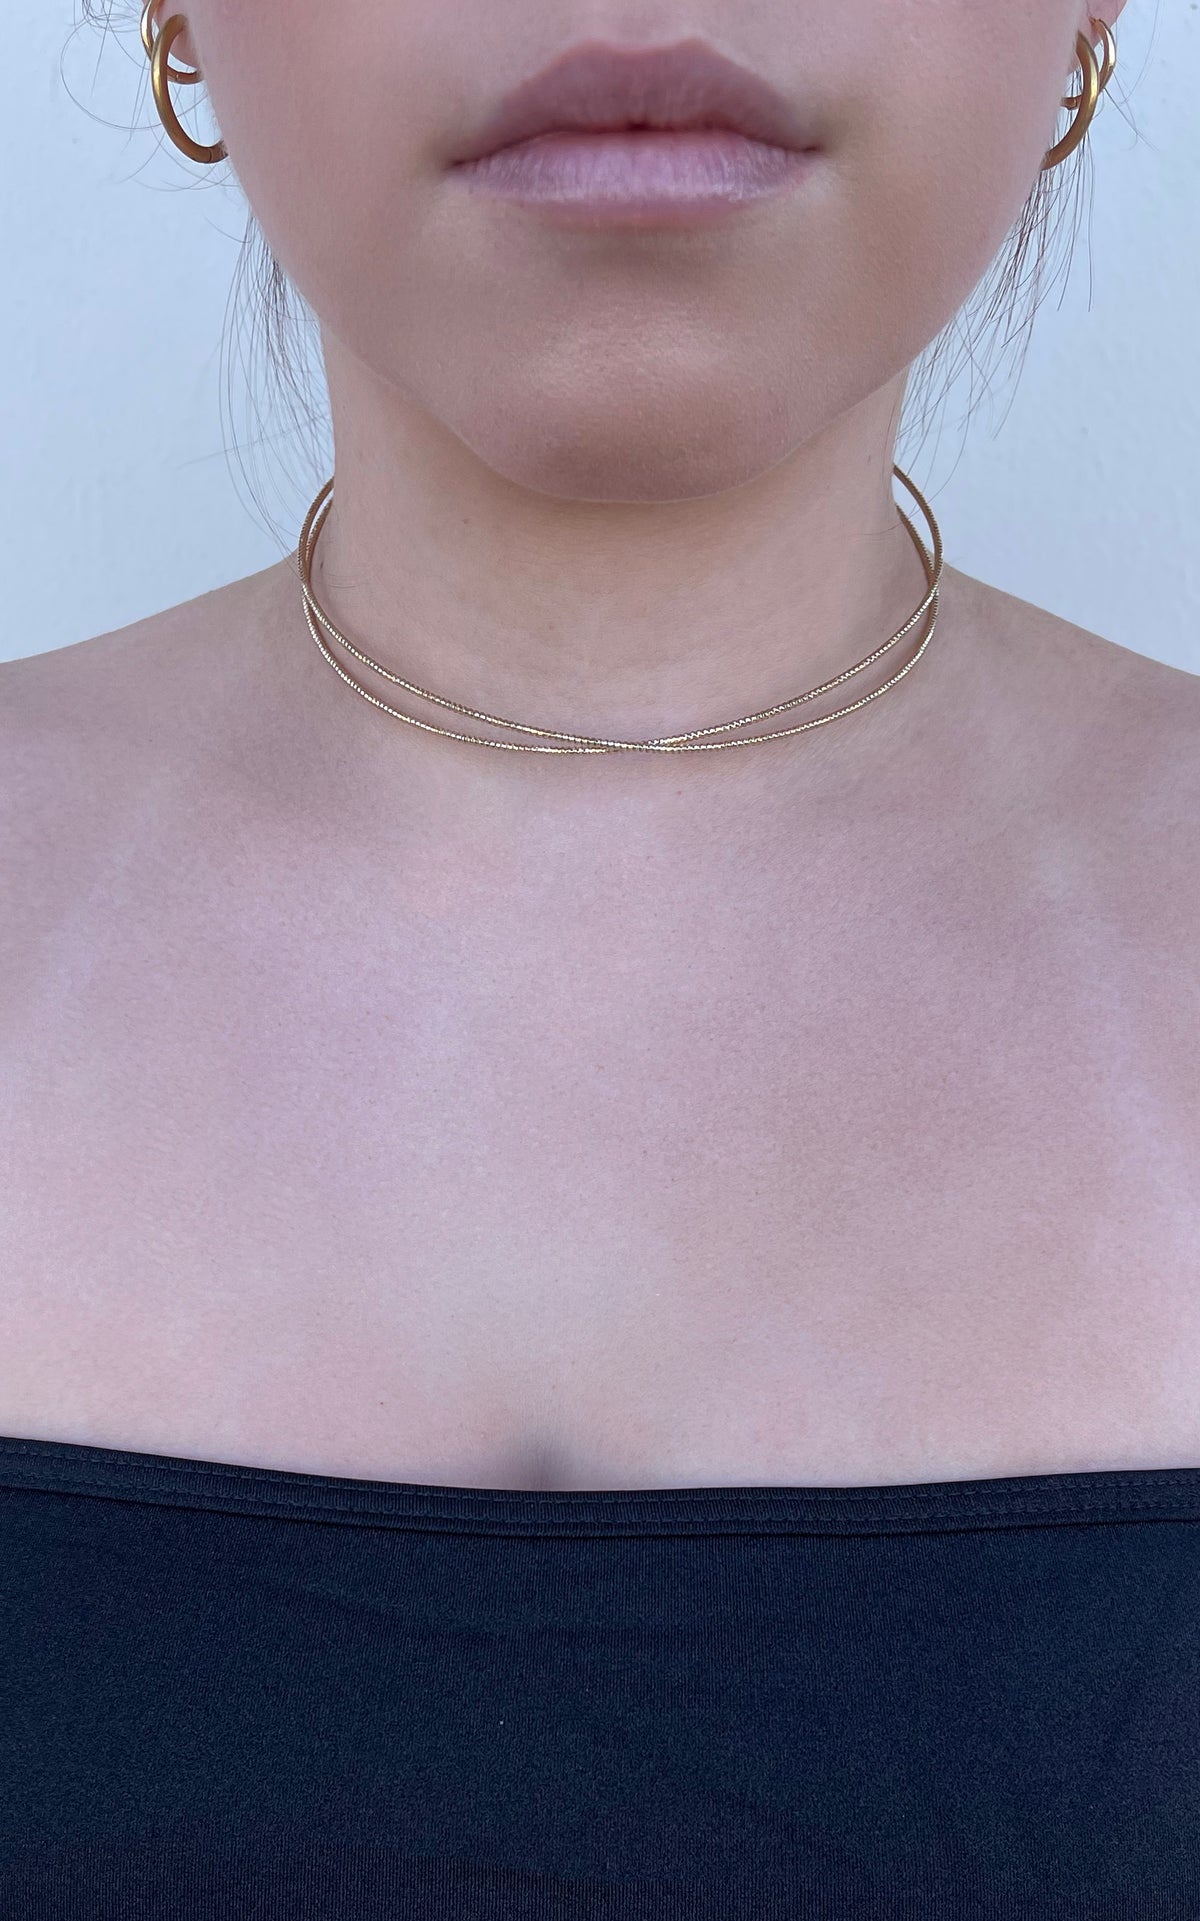 NECKLACE: 2 Layer Gold Necklace